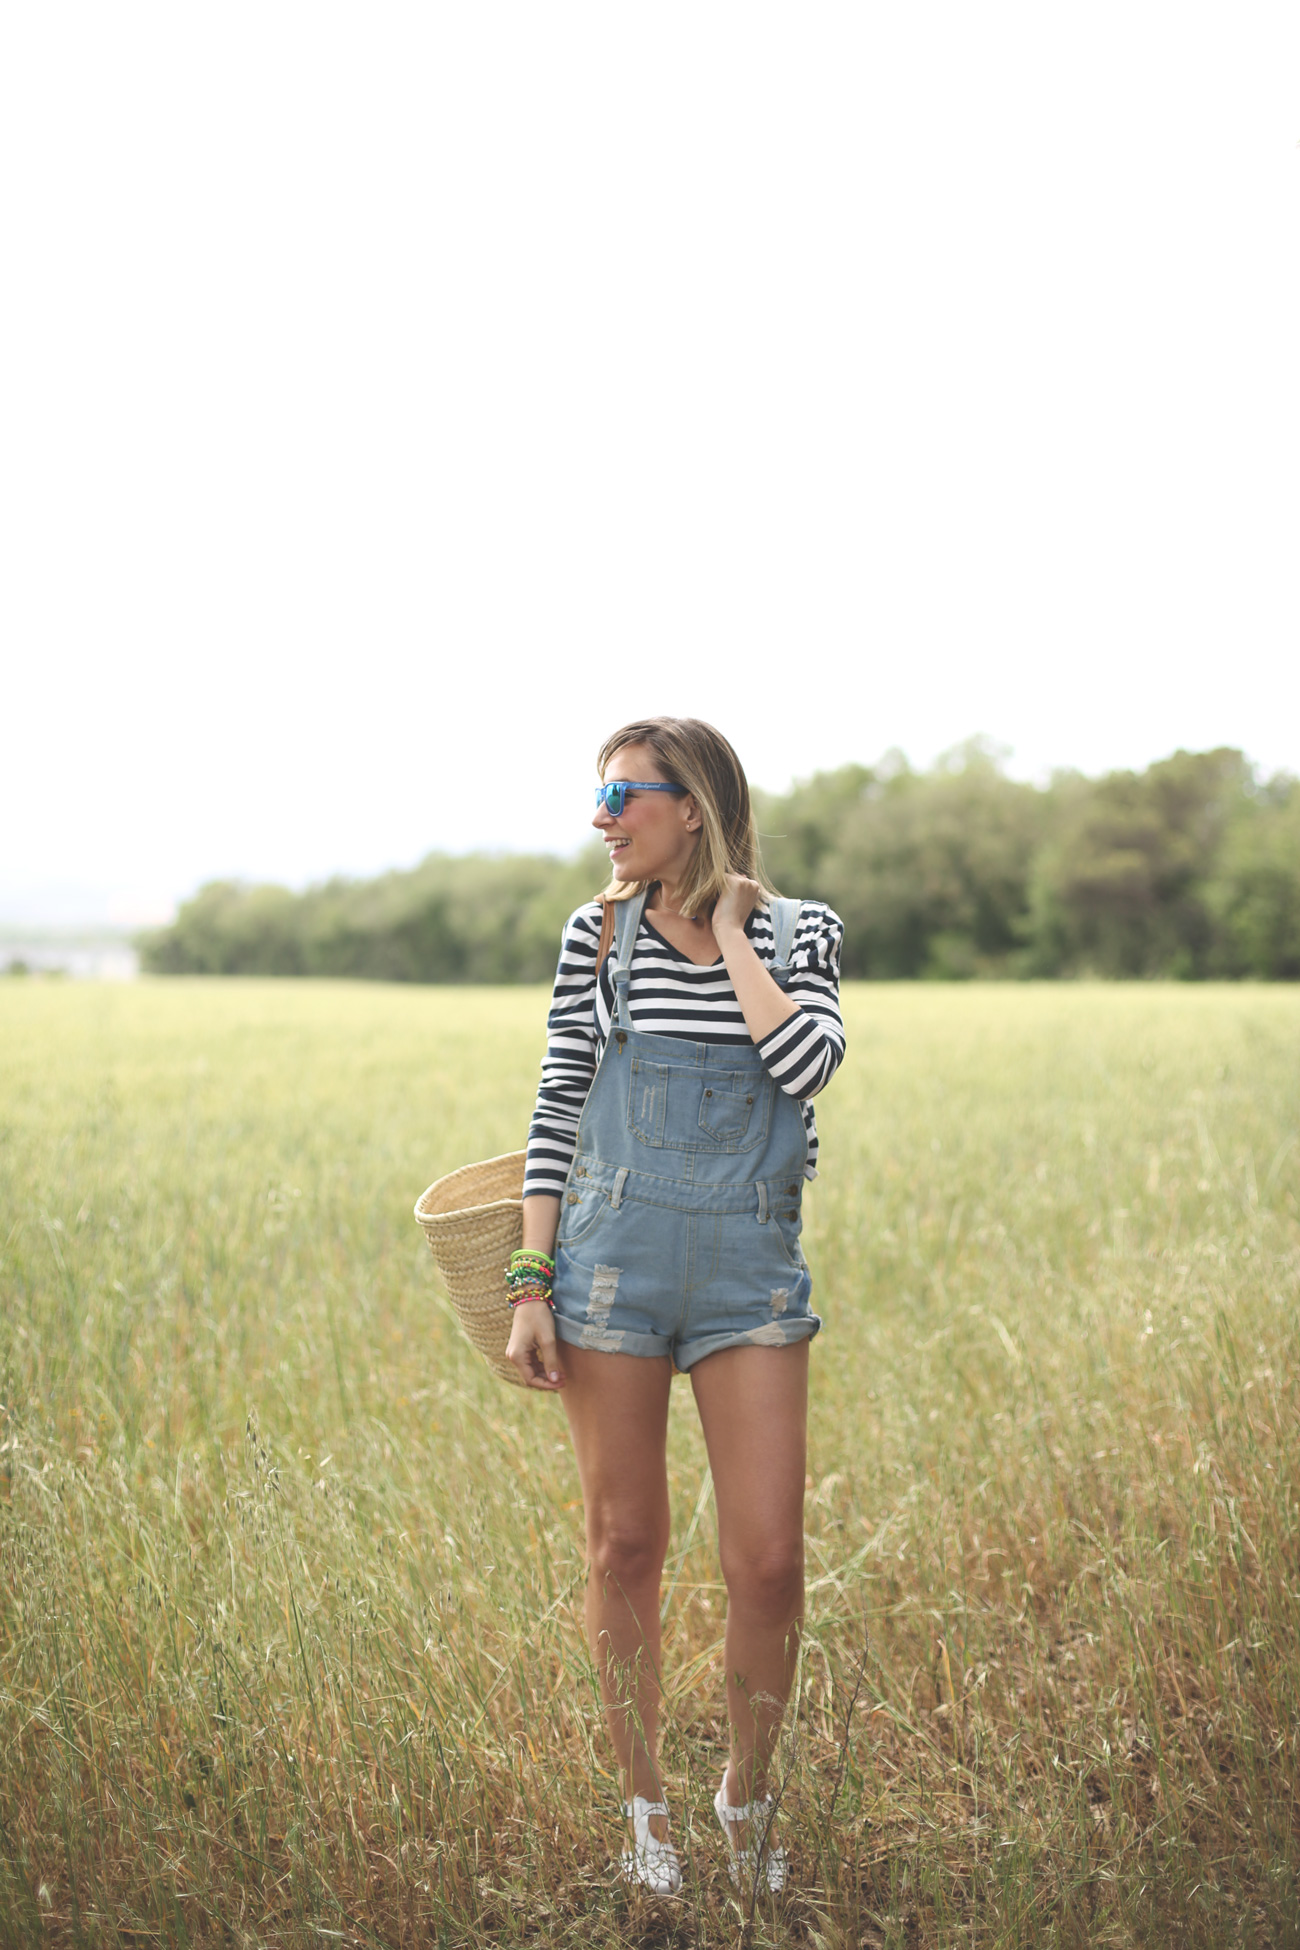 Sheinside, Denim, striped tee, look, picnic, outfit, mirror sunglasses, colorful bracelets, sandals, spring look